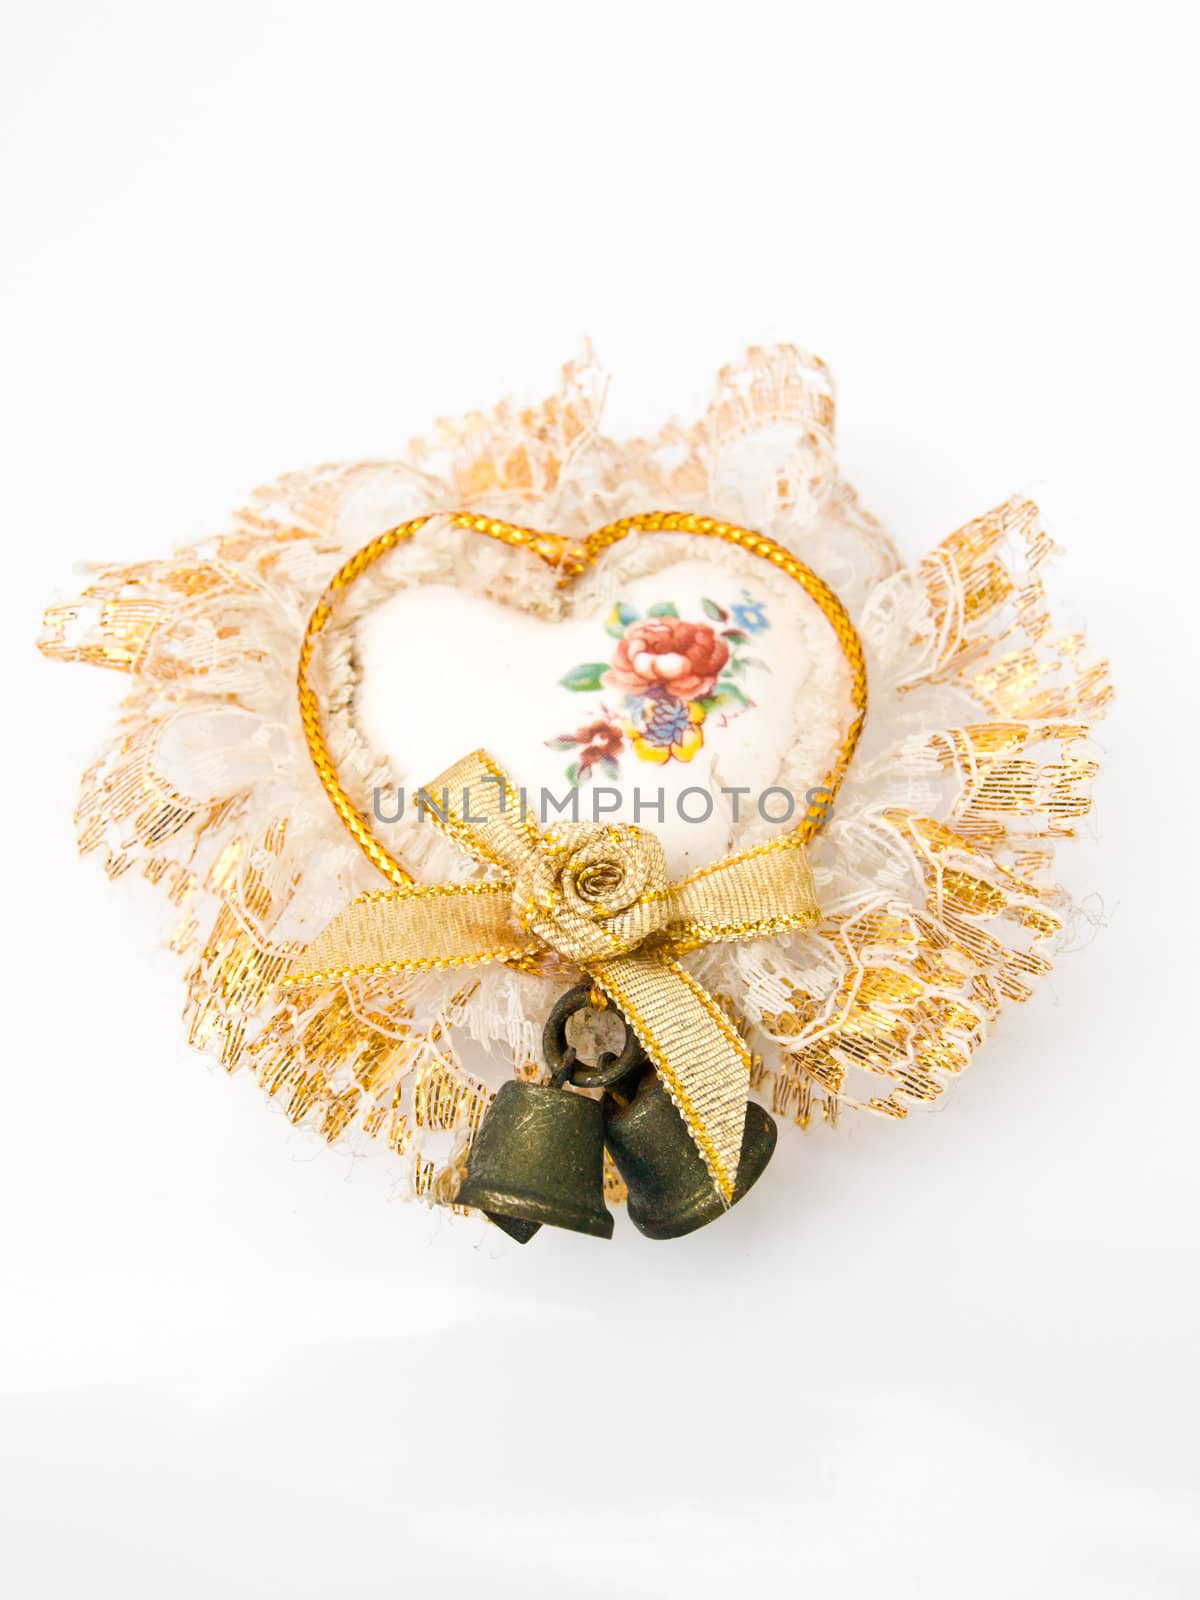 A ceramic heart decorated with bells and lace isolated on white by gururugu